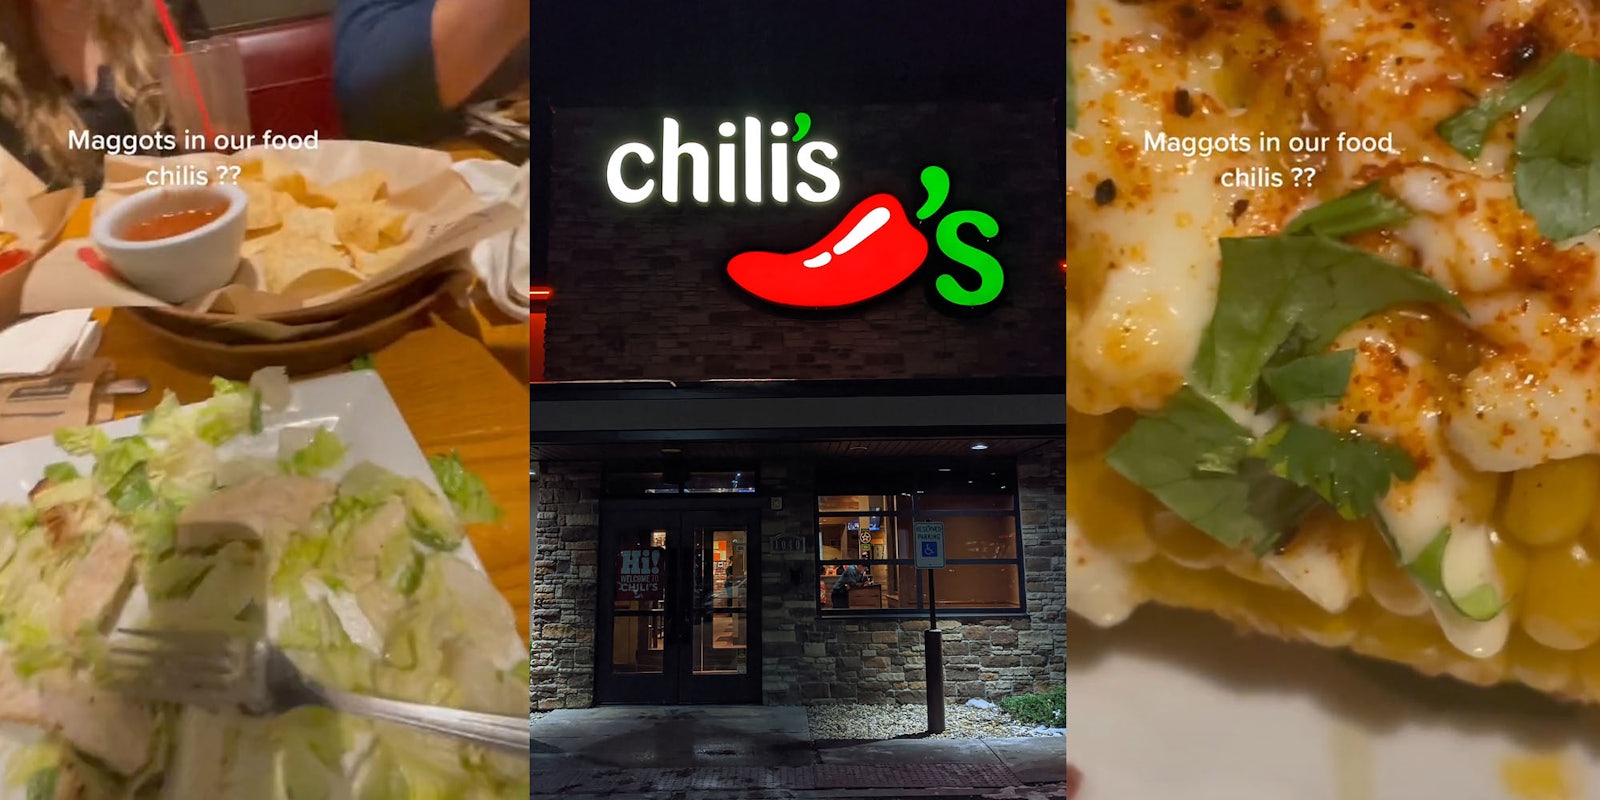 Chilis table with family bowl of chips and salad caption 'maggots in our food chili's?' (l) Chili's Bar and Grill building with sign (c) Close up of food caption 'maggots in our food chili's?' (r)